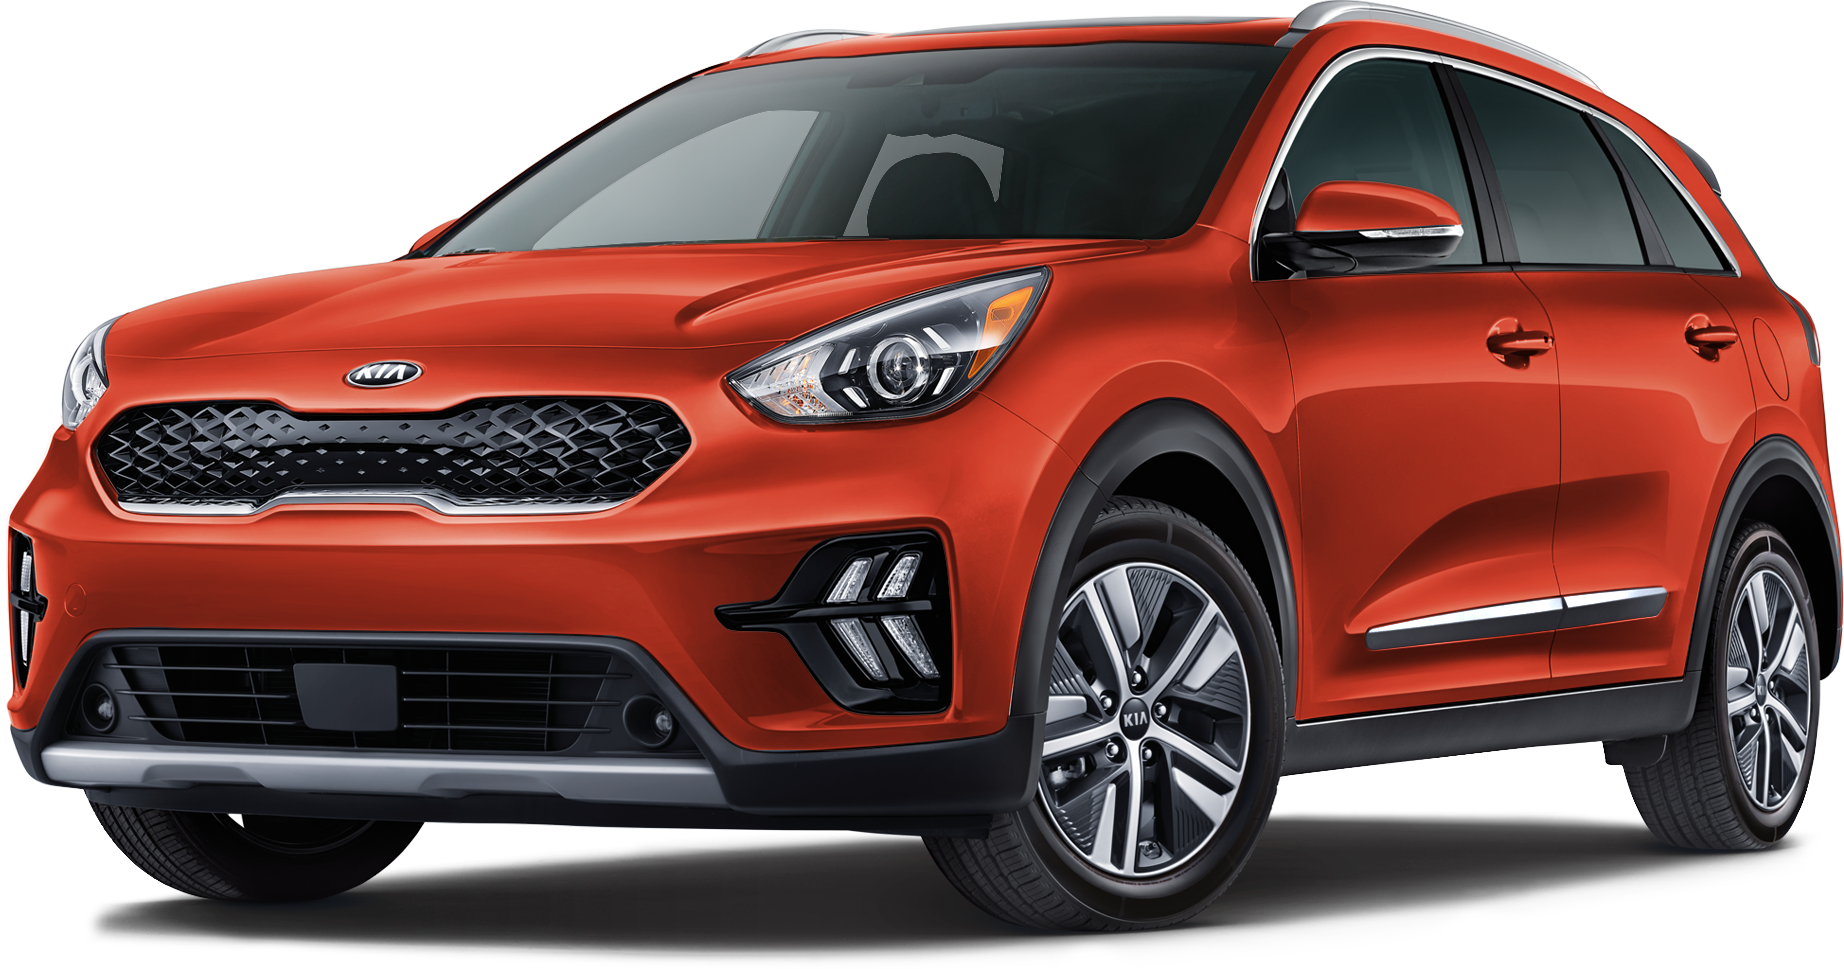 2020-kia-niro-incentives-specials-offers-in-orchard-park-ny